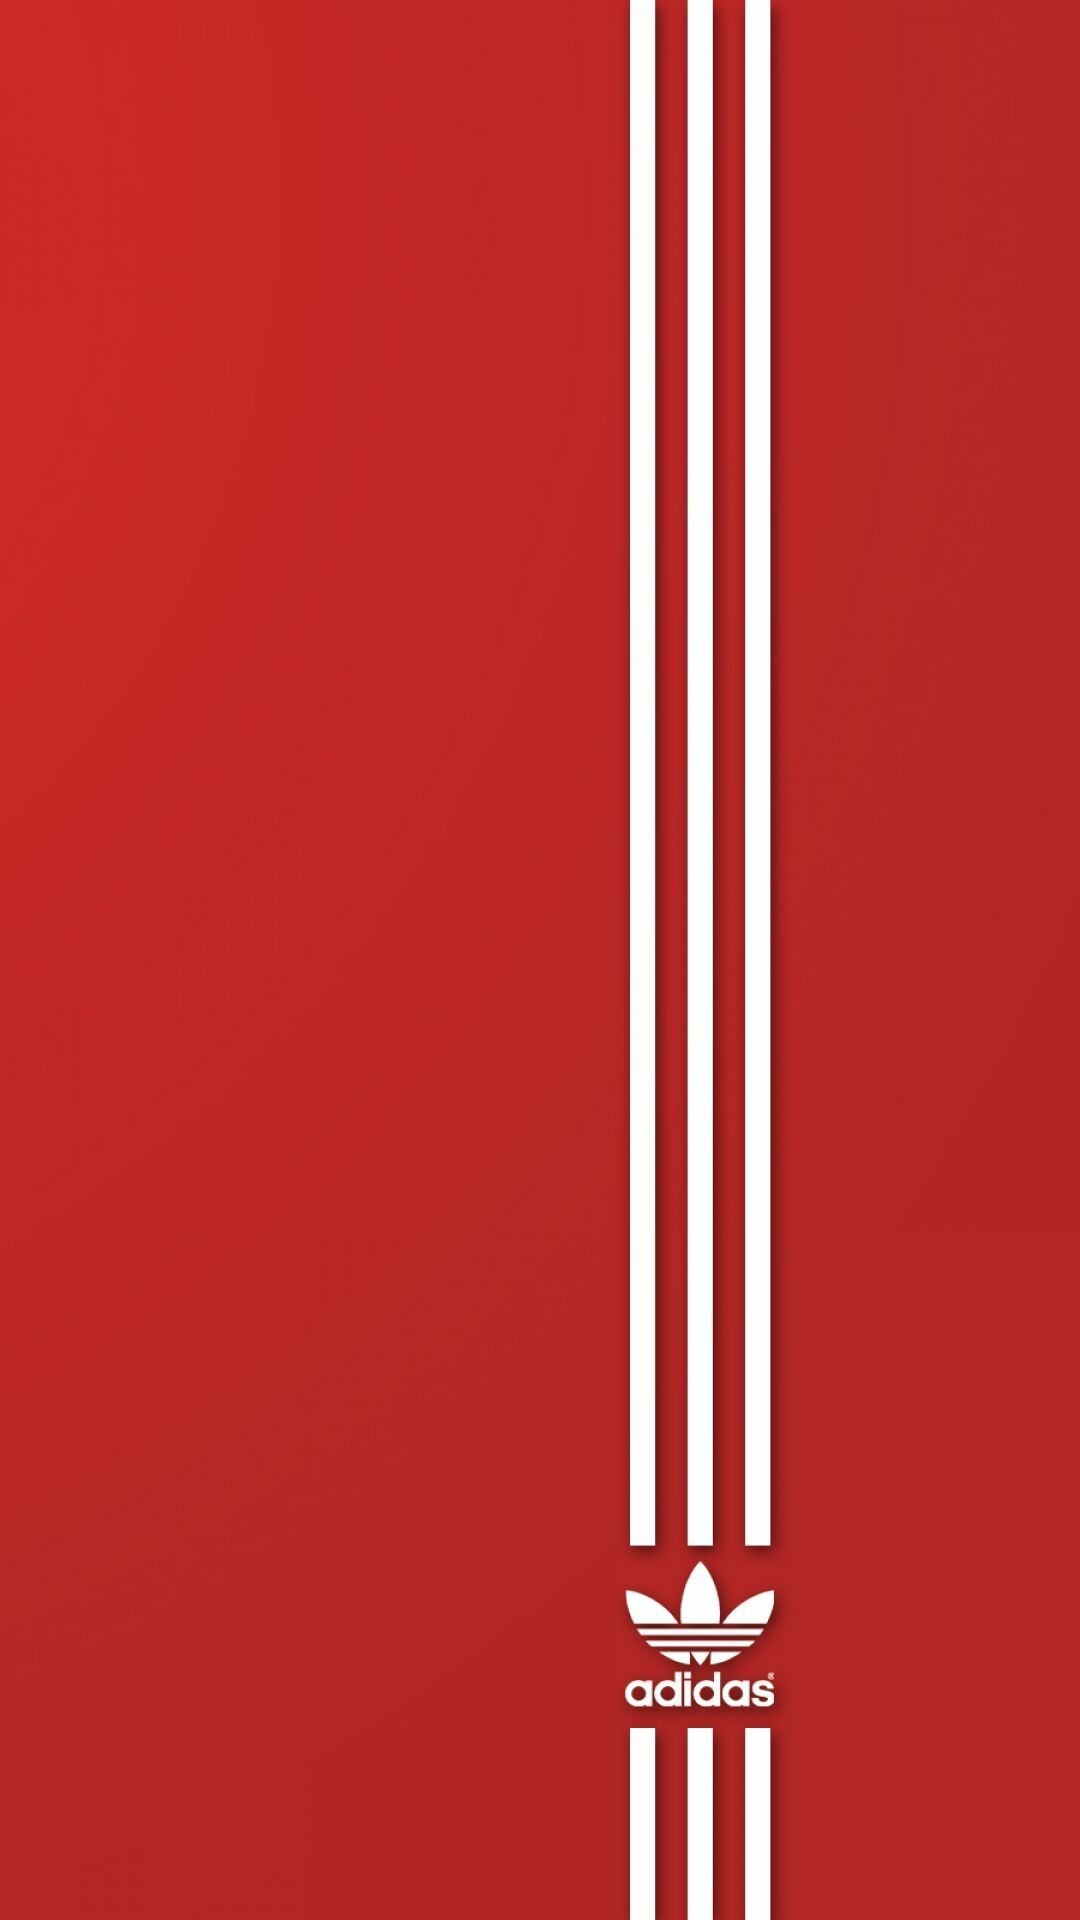 Adidas Wallpapers (40+ images inside)